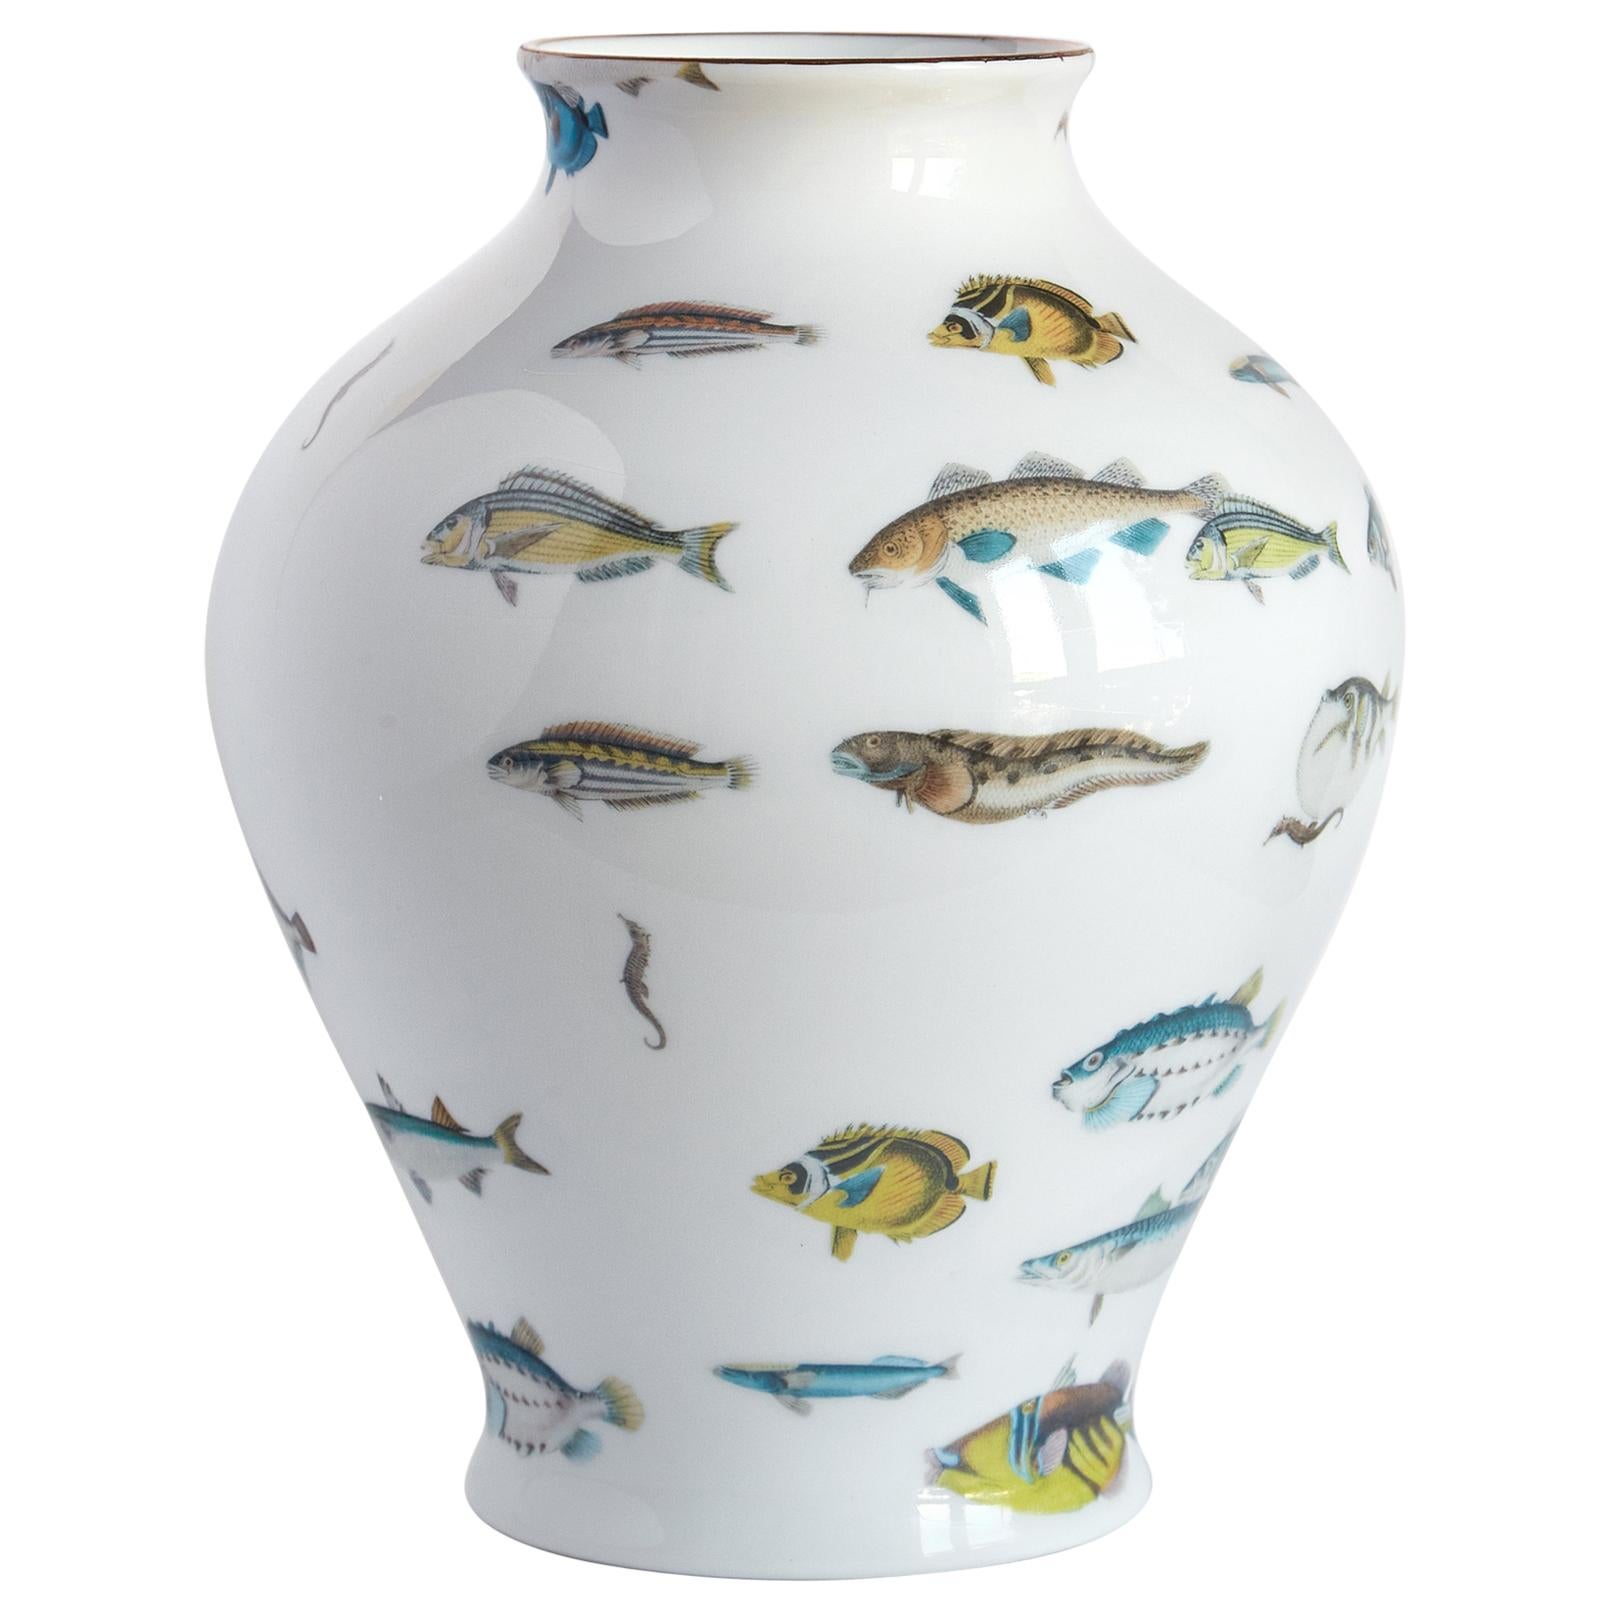 Reef, Contemporary Porcelain Vase with Decorative Design by Vito Nesta